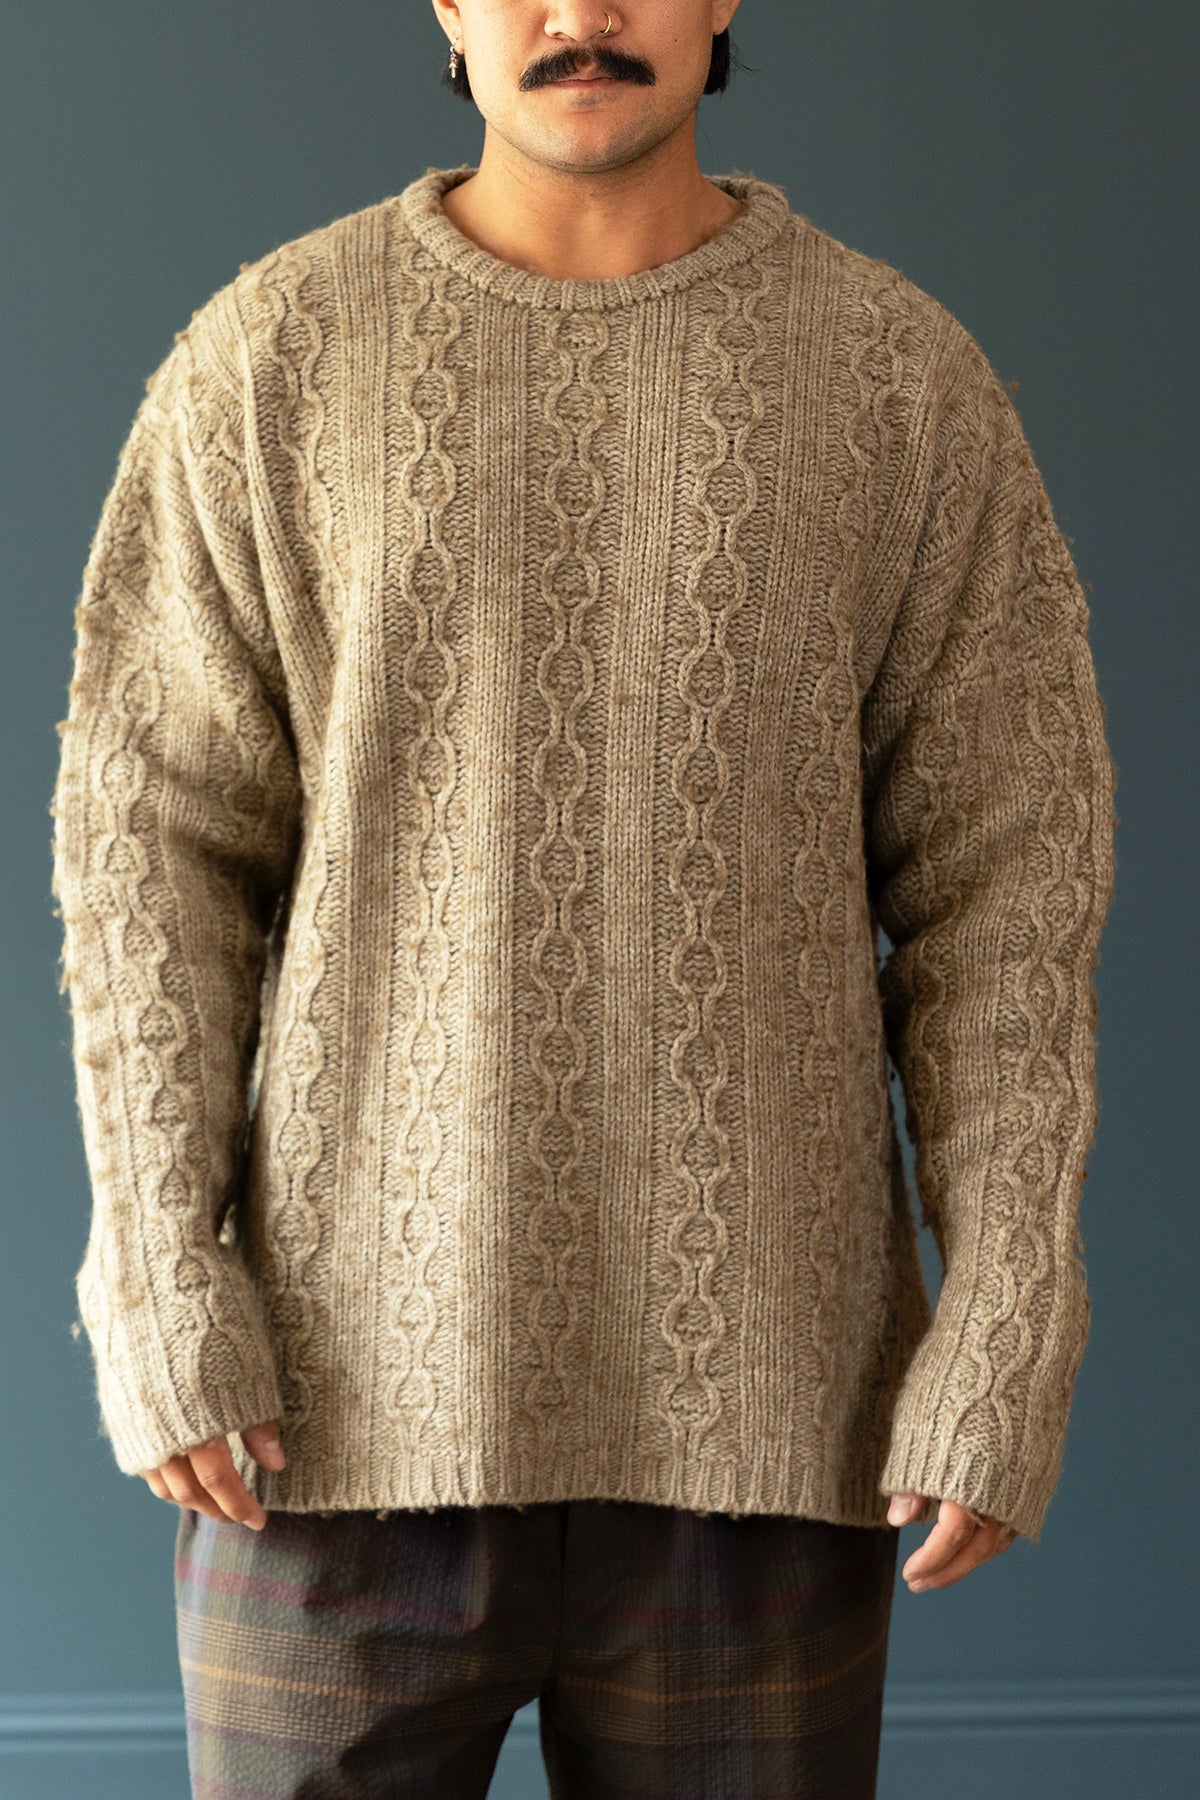 Popover Roundneck - Peafowl Funky Chain Knit